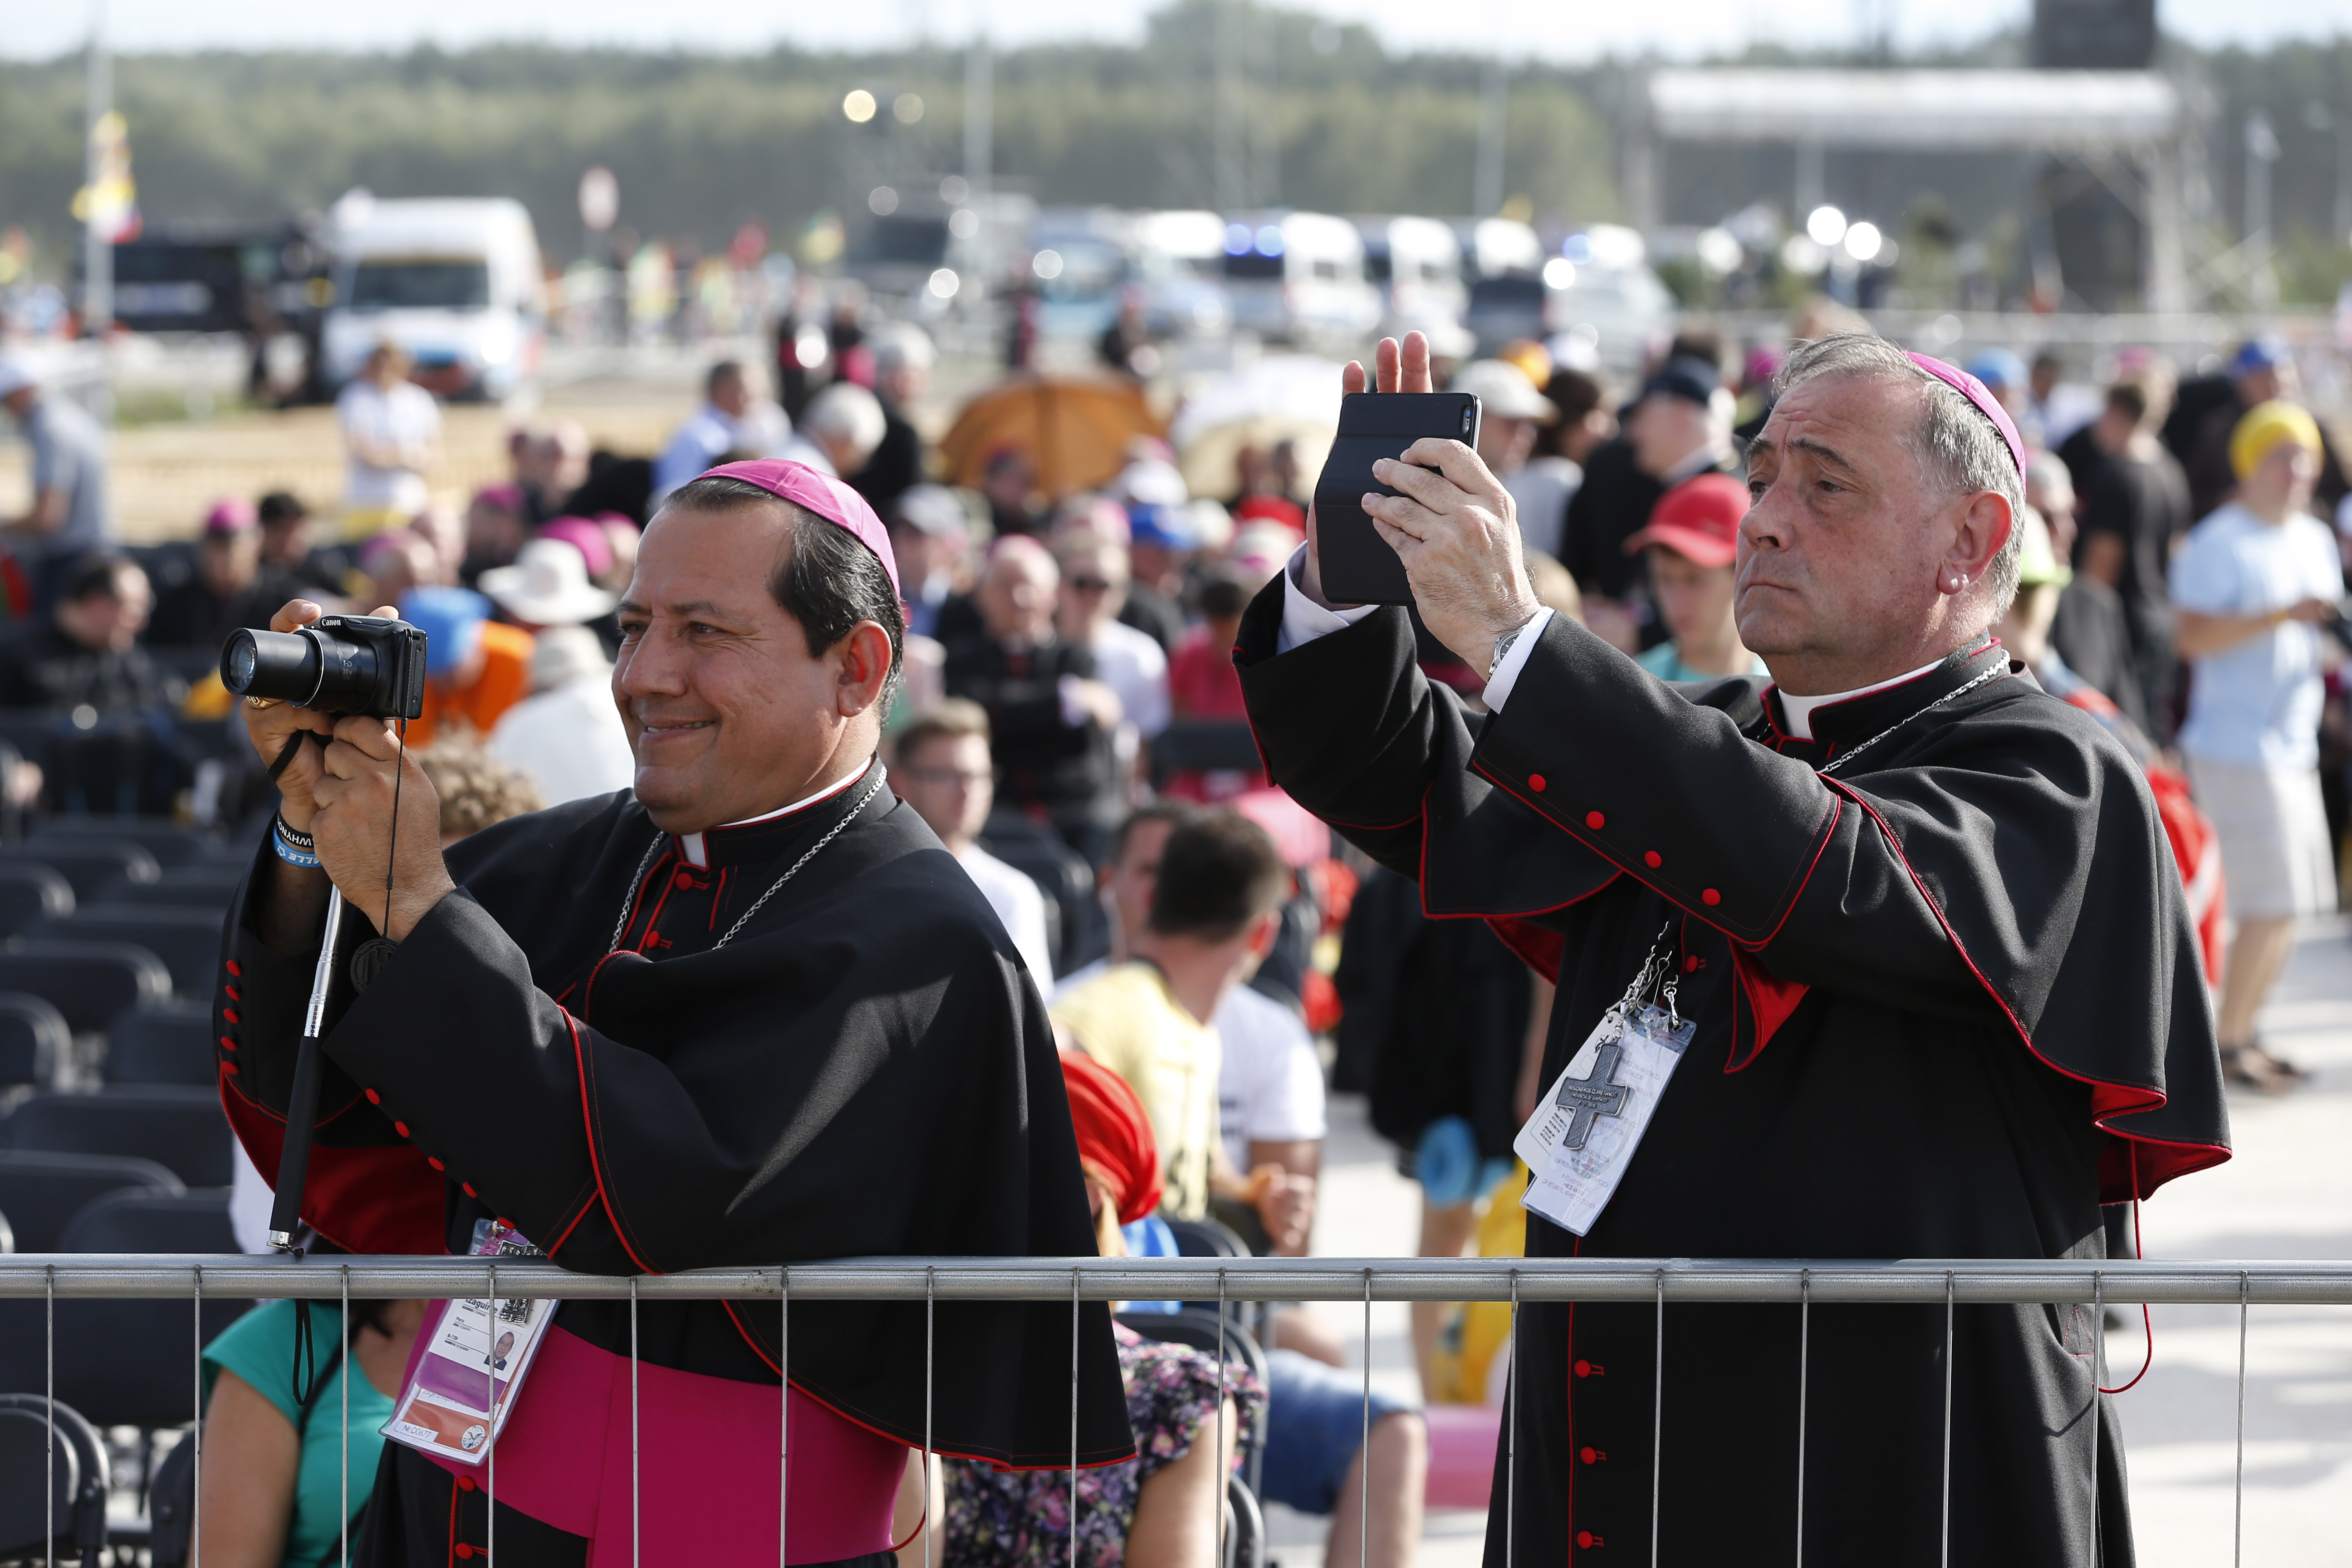 Bishops awaits the Pope's arrival